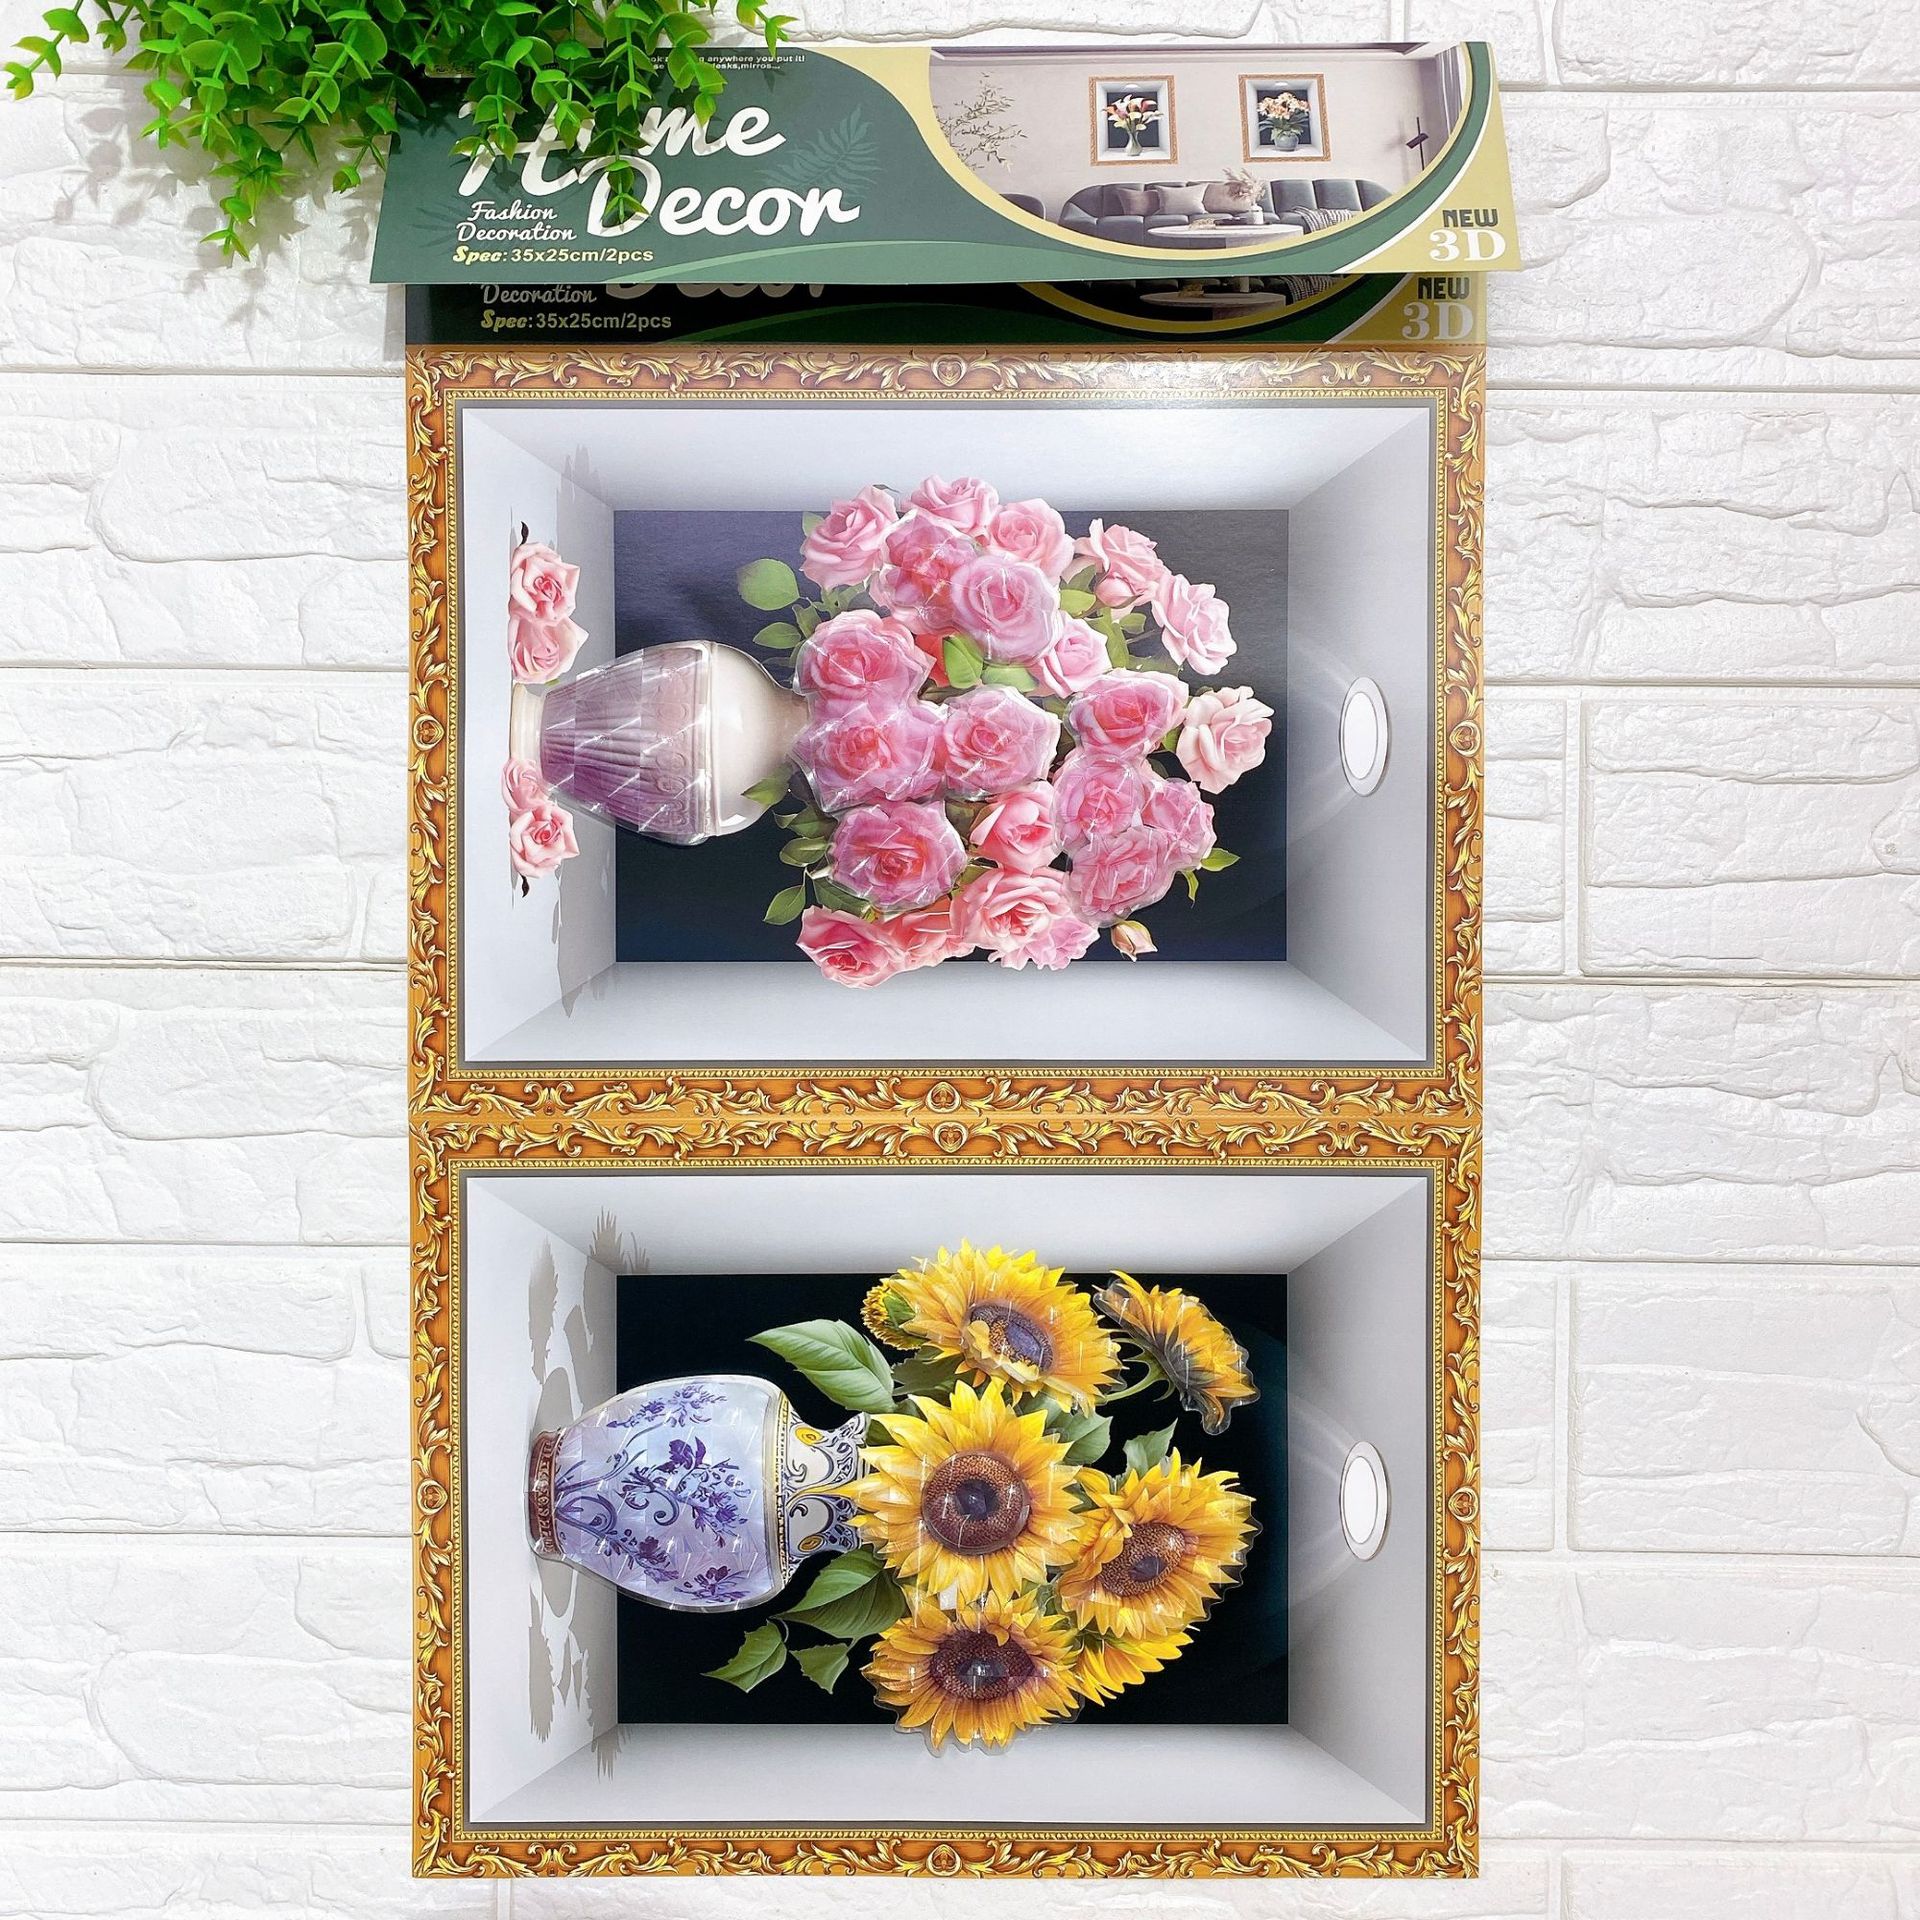 Vase Photo Frame Decorative Furniture Wall Stickers Pvc Vase Living Room Bedroom Entrance Wall Decorative Three-Dimensional Layer Stickers